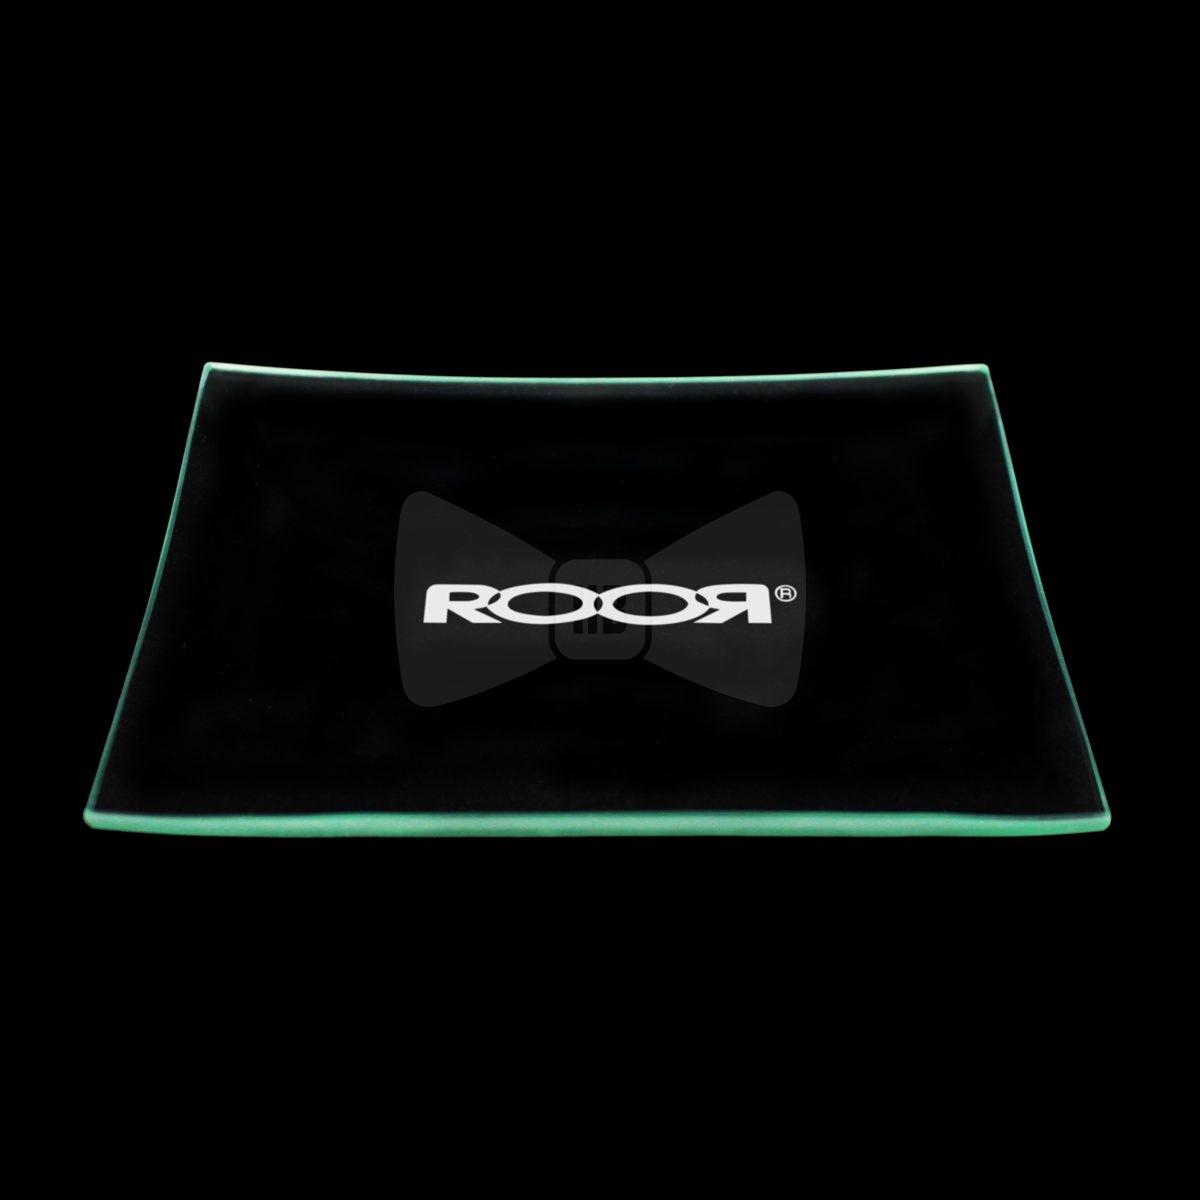 Roor Glass Rolling Tray 4